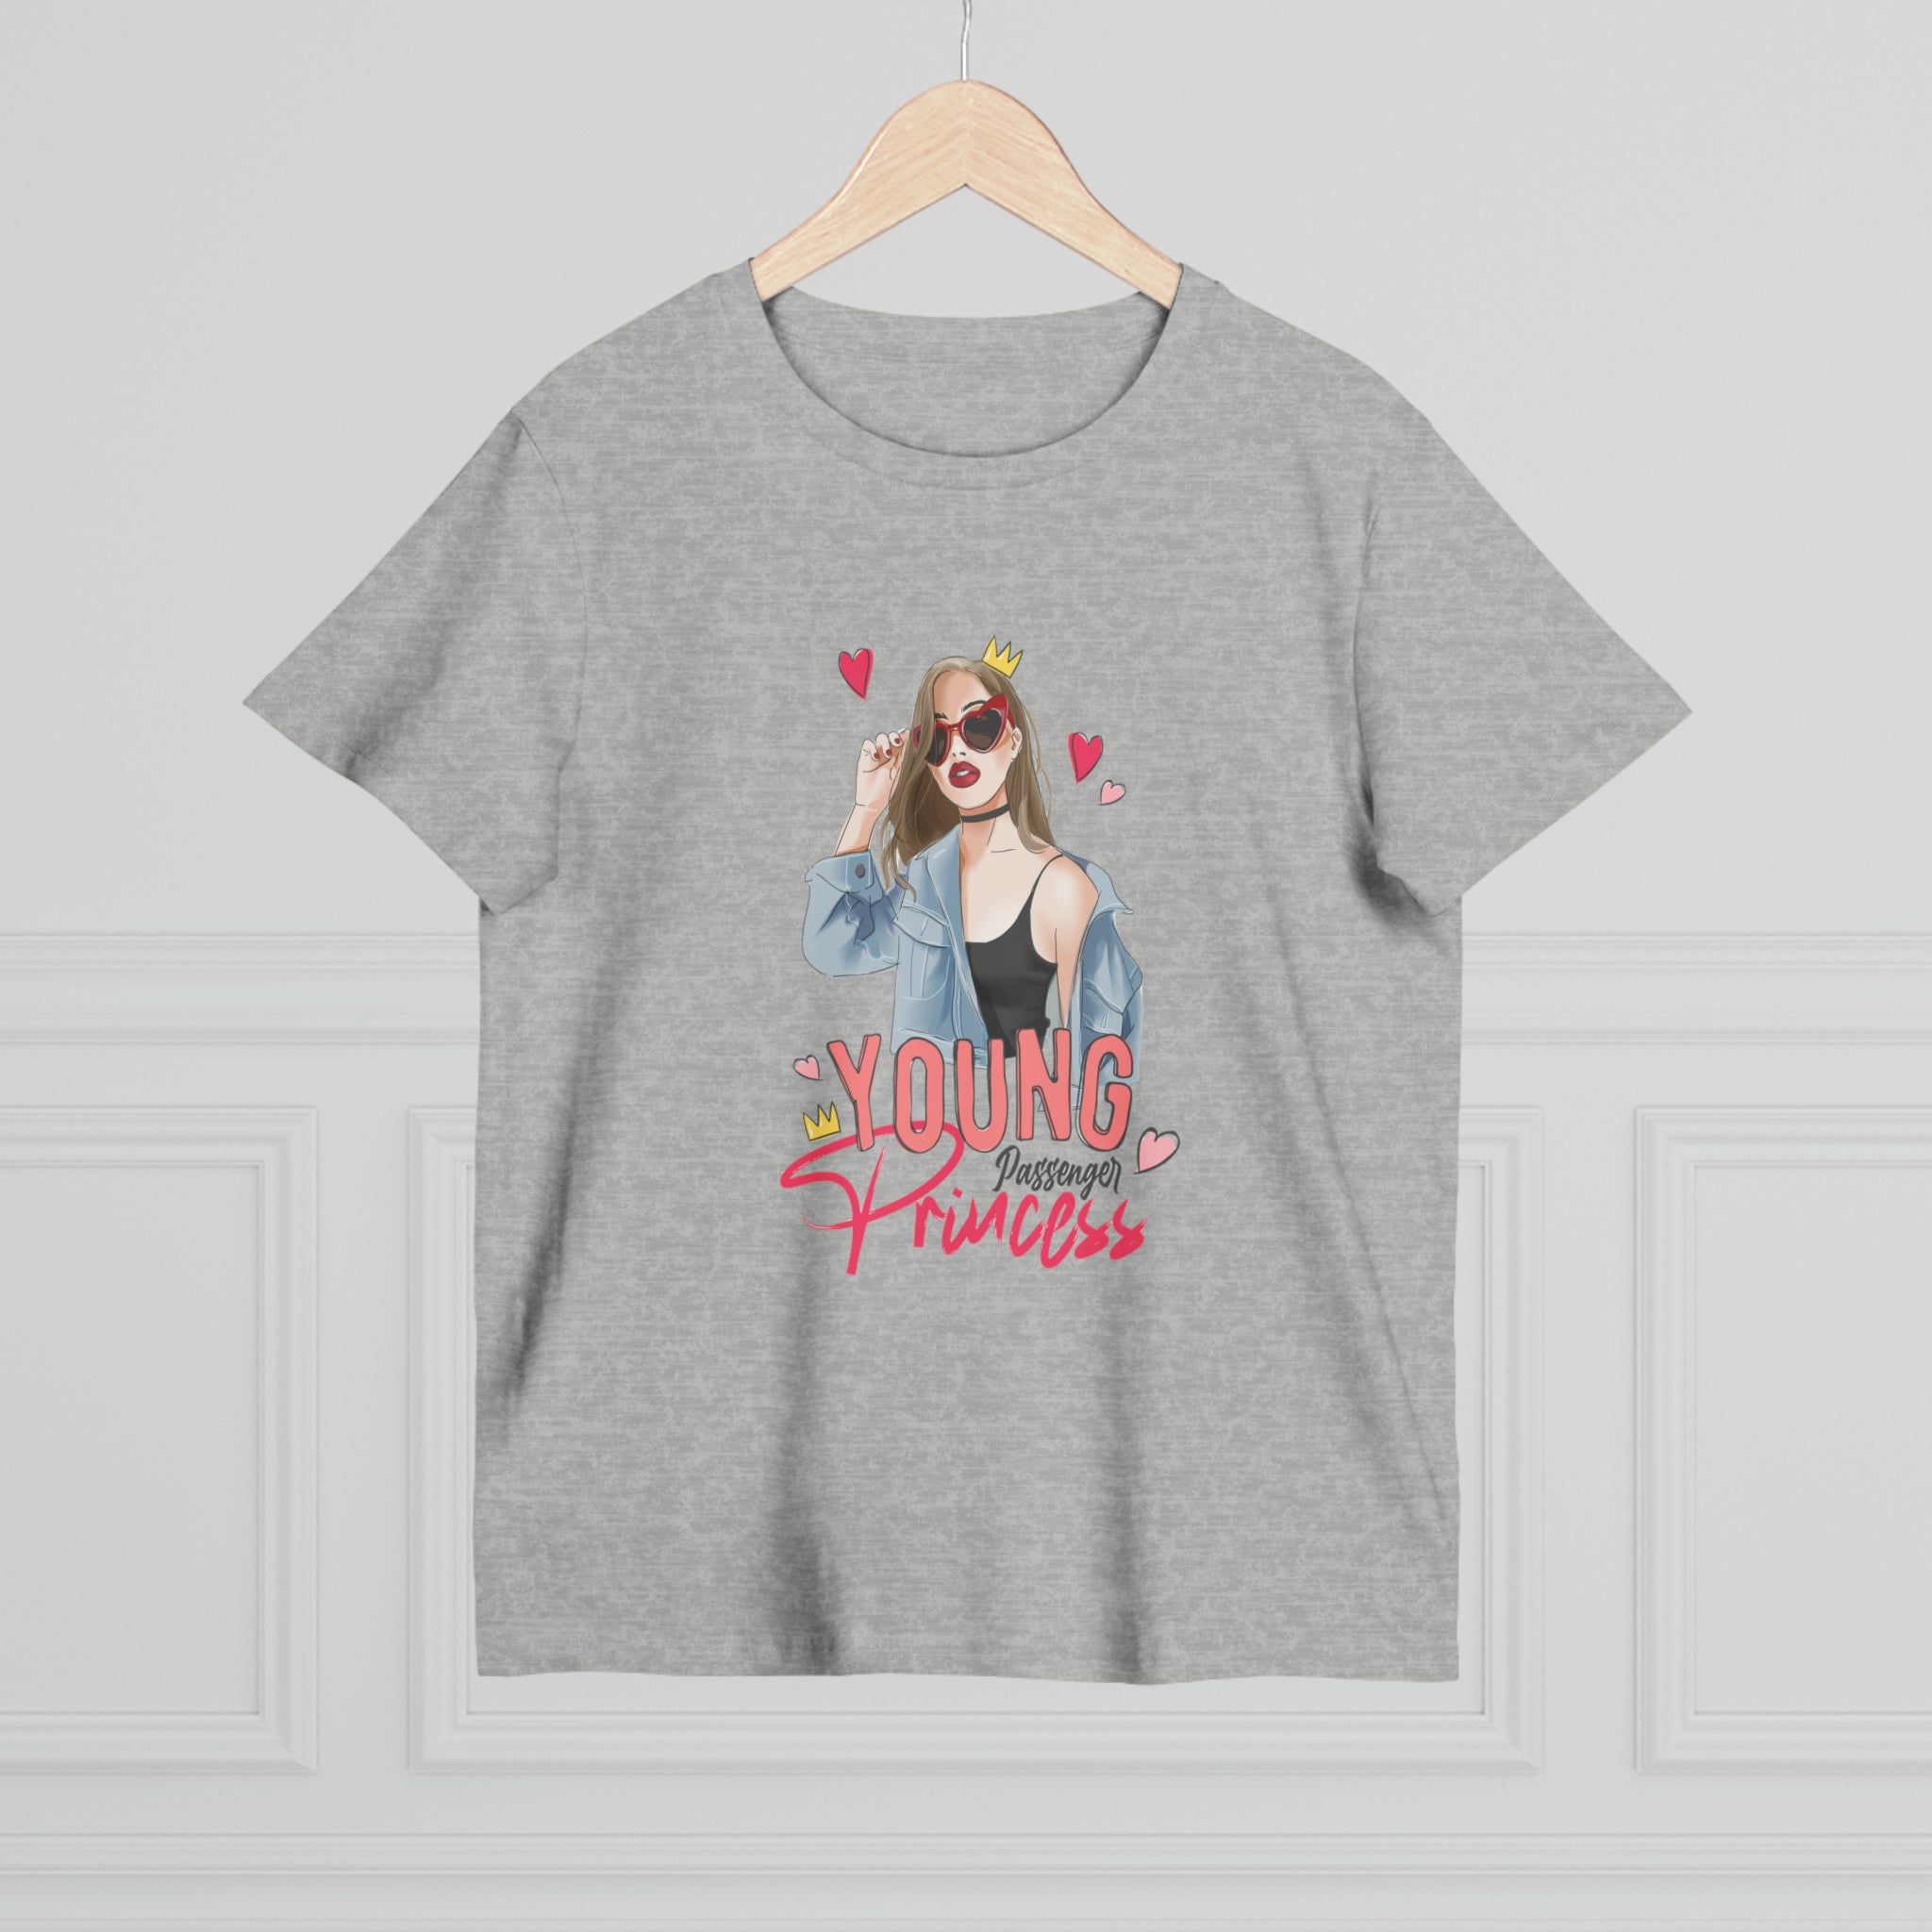 Young Passenger Princess - Women’s Maple Tee (DTF)